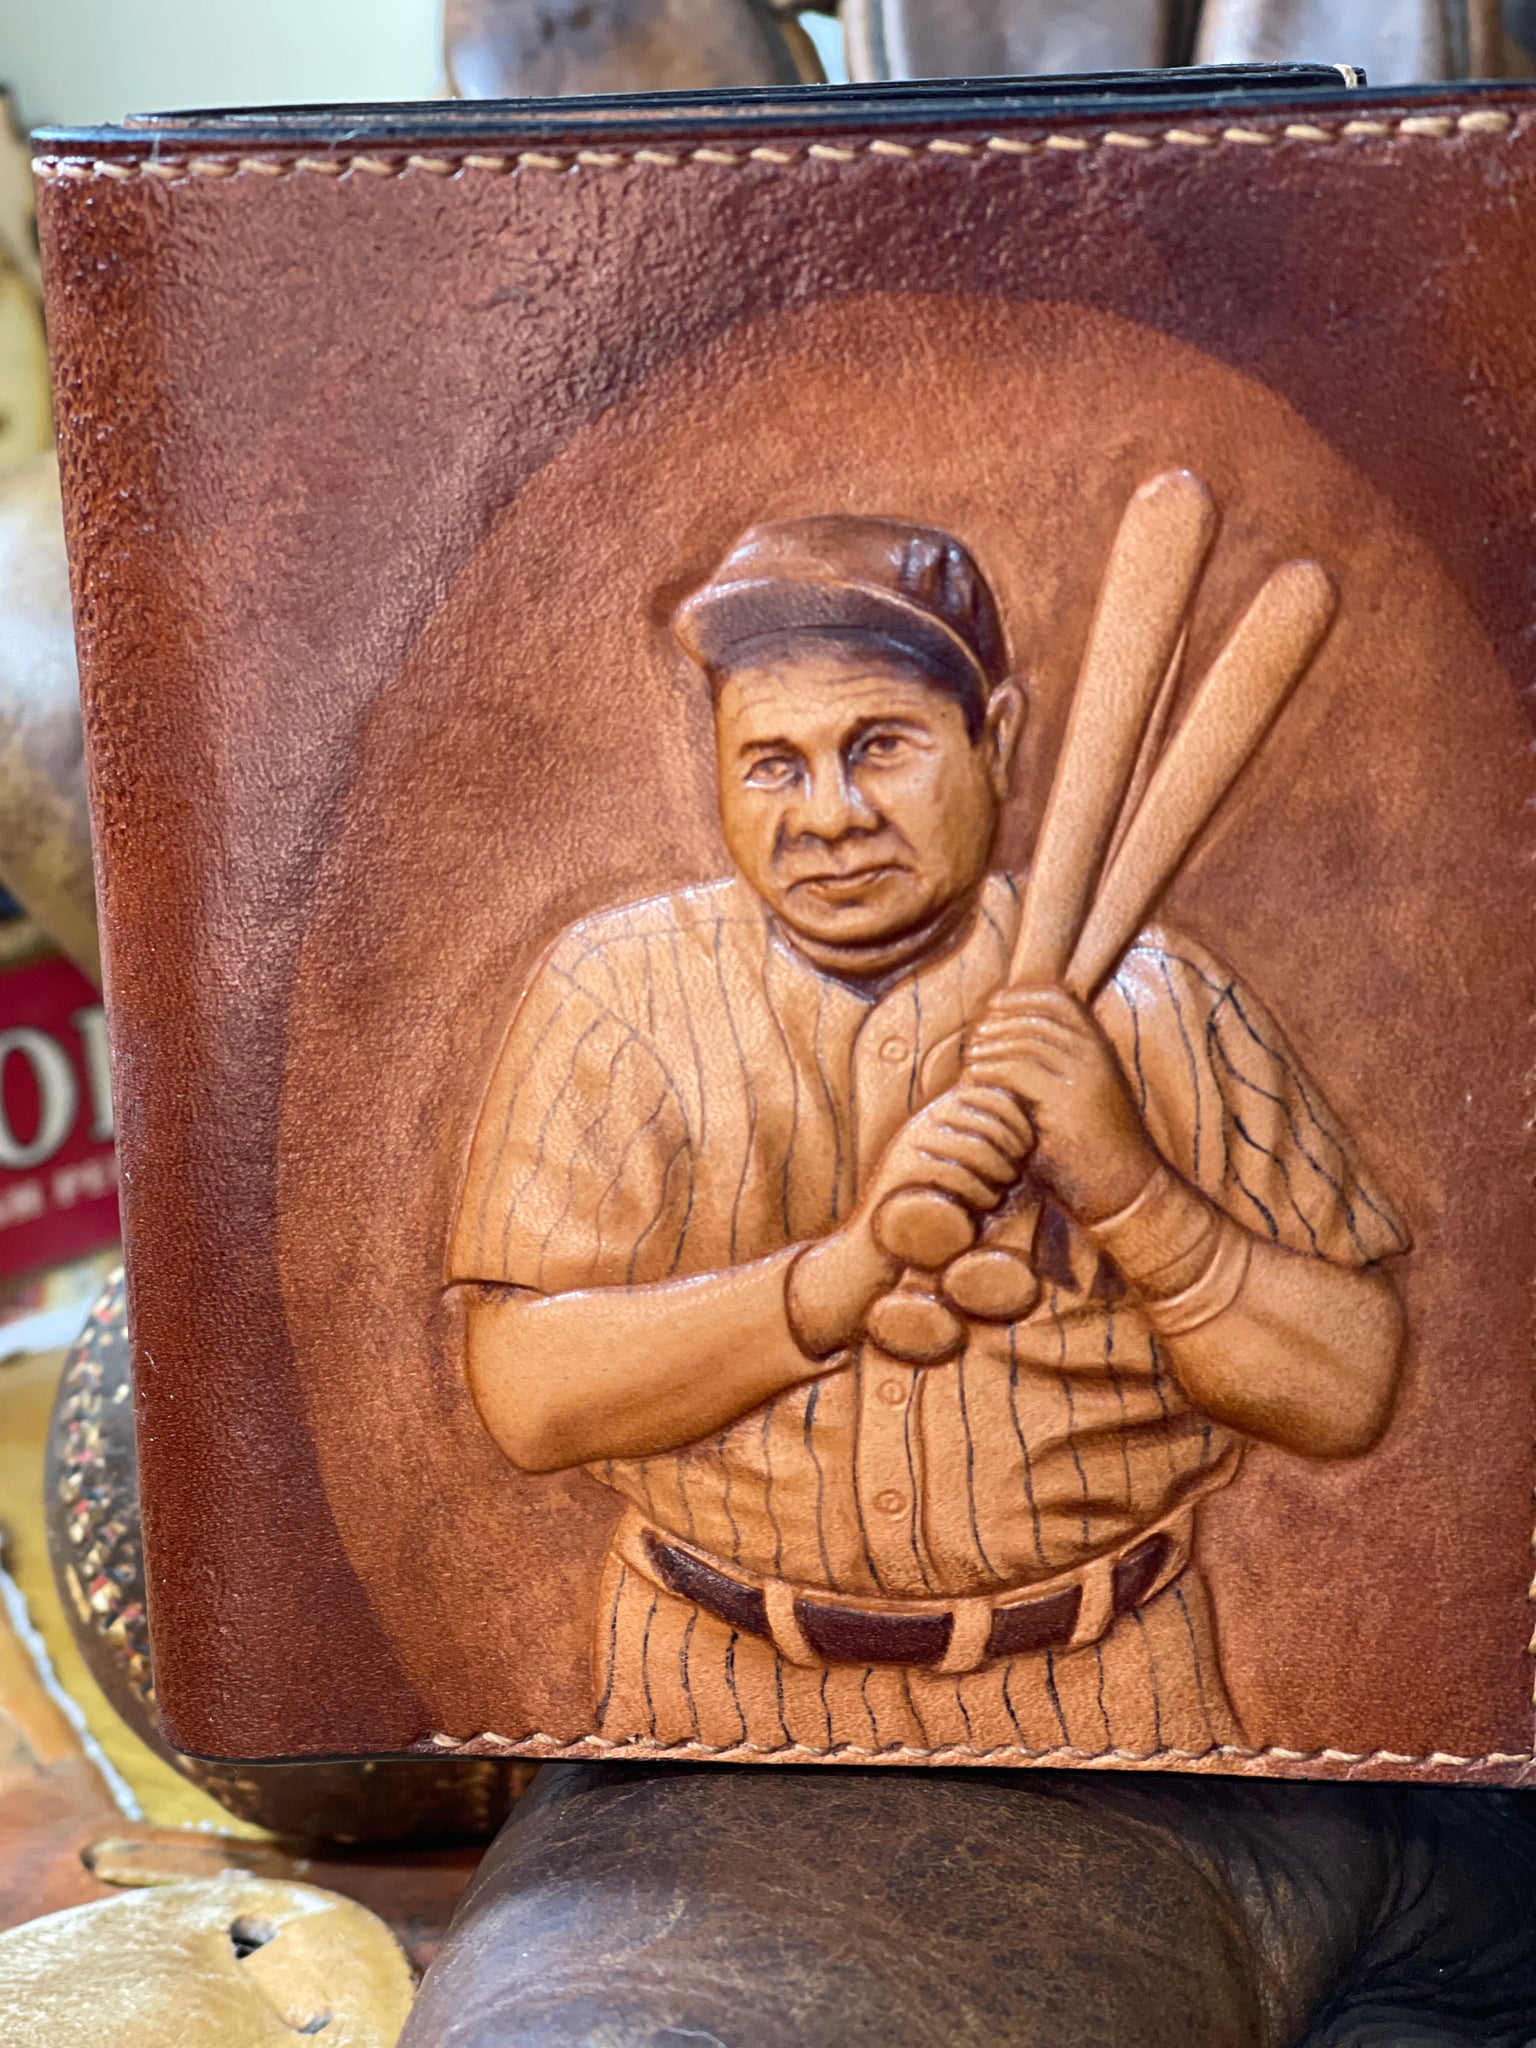 No. 3 Babe Ruth Personalized Front Pocket Wallet